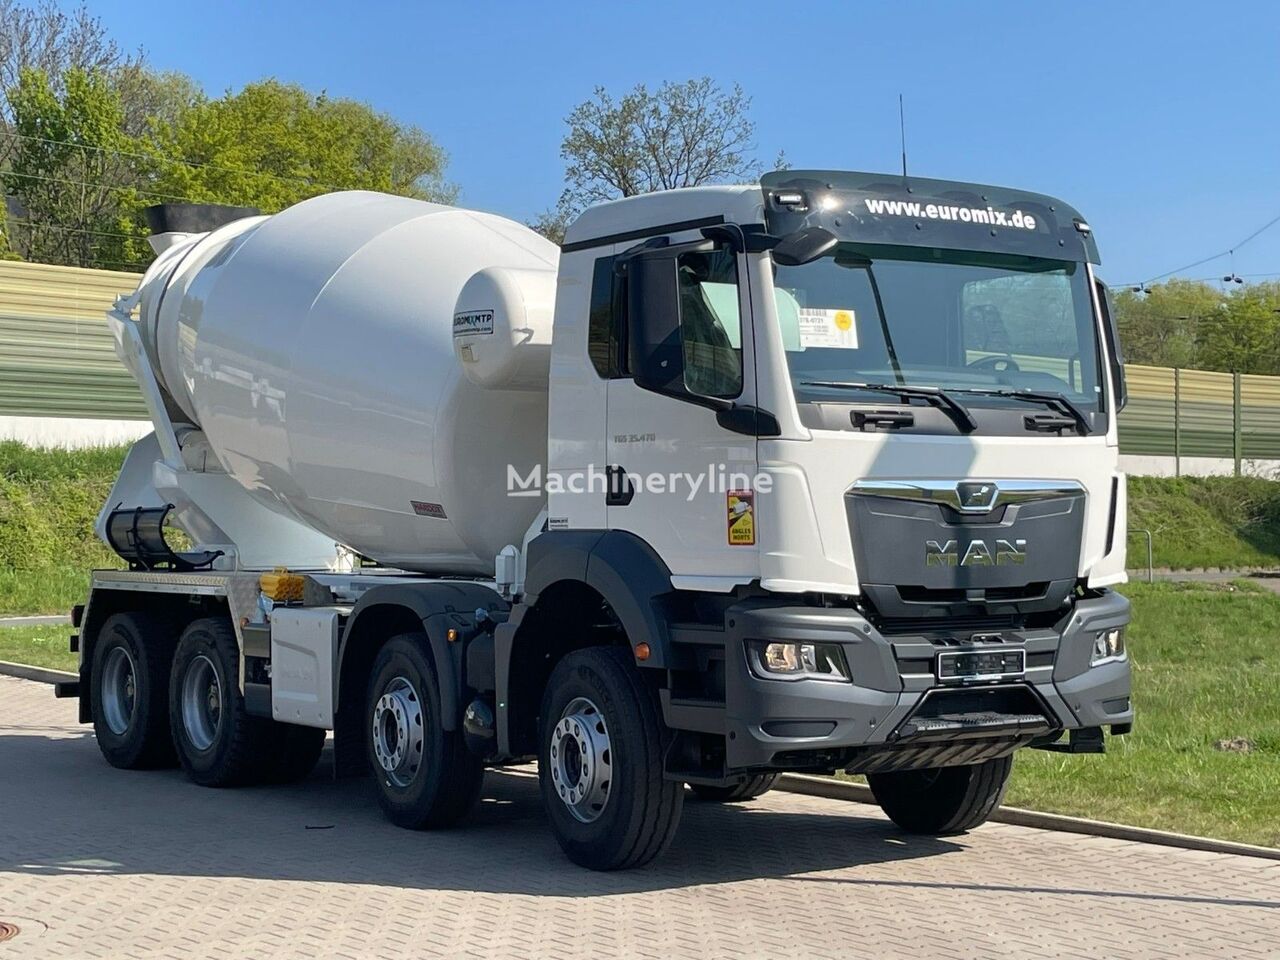 new Euromix MTP  MTP EM 9 L on chassis MAN TGS 37.470 8x4 concrete mixer truck